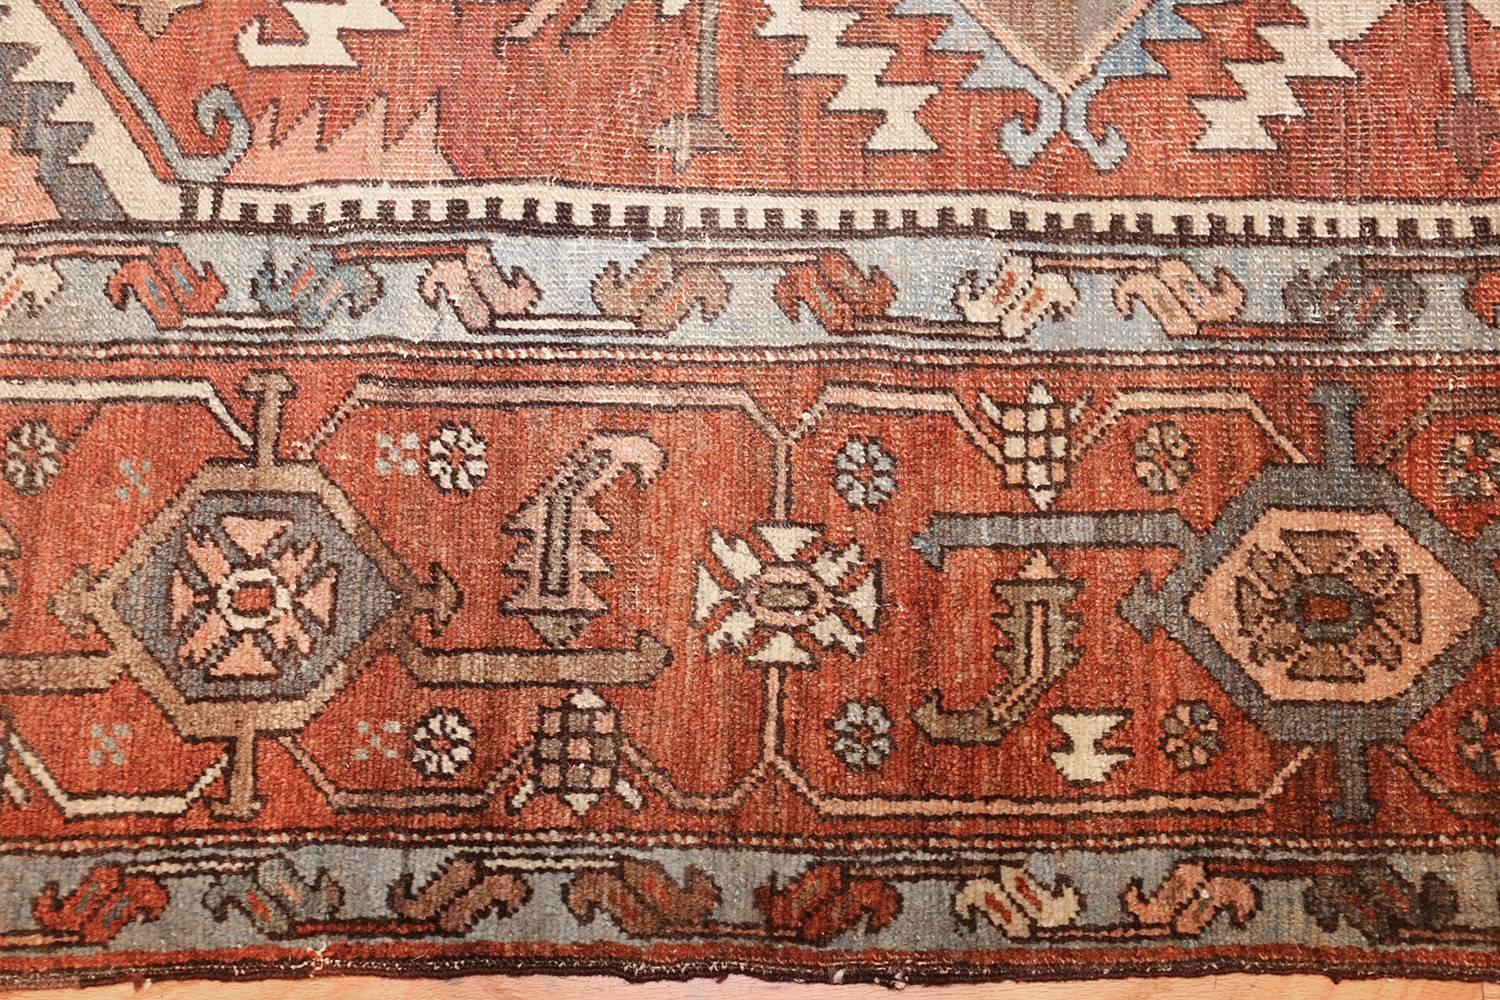 Antique Serapi Carpet, Country Of Origin: Persia, Circa Date: 1900. Size: 9 ft 9 in x 12 ft 10 in (2.97 m x 3.91 m)

Woven in northwestern Iran, this bold Serapi rug boasts masterful artistry, clarity of design, and stunningly lovely symmetry that